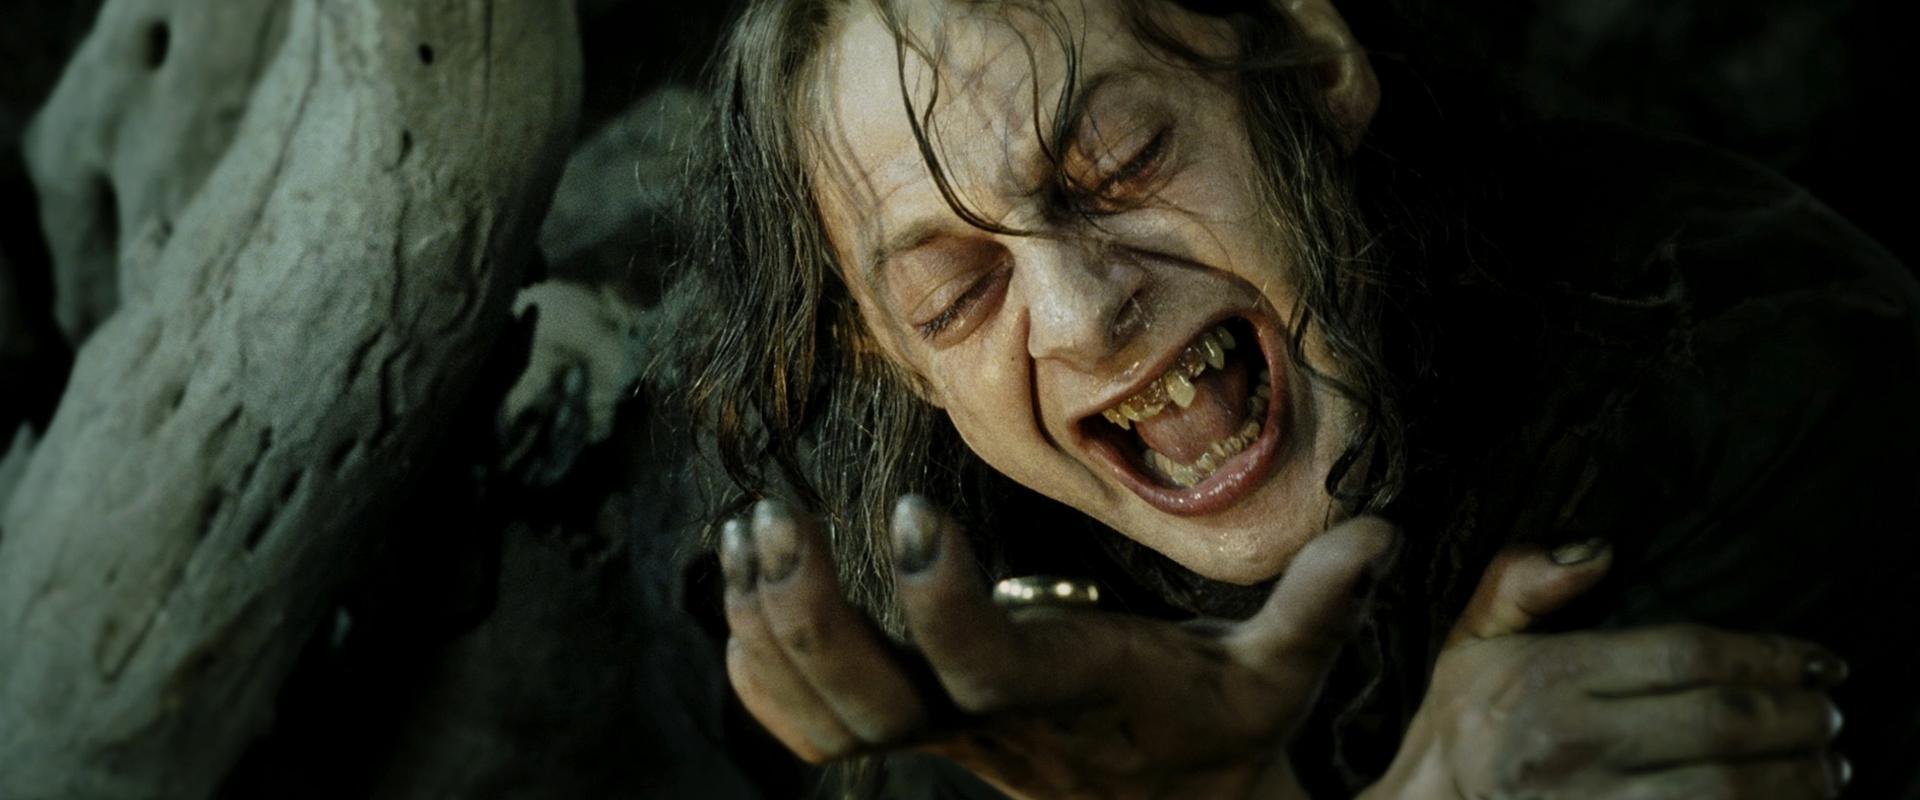 The Lord of the Rings: The Return of the King - Golden Globes